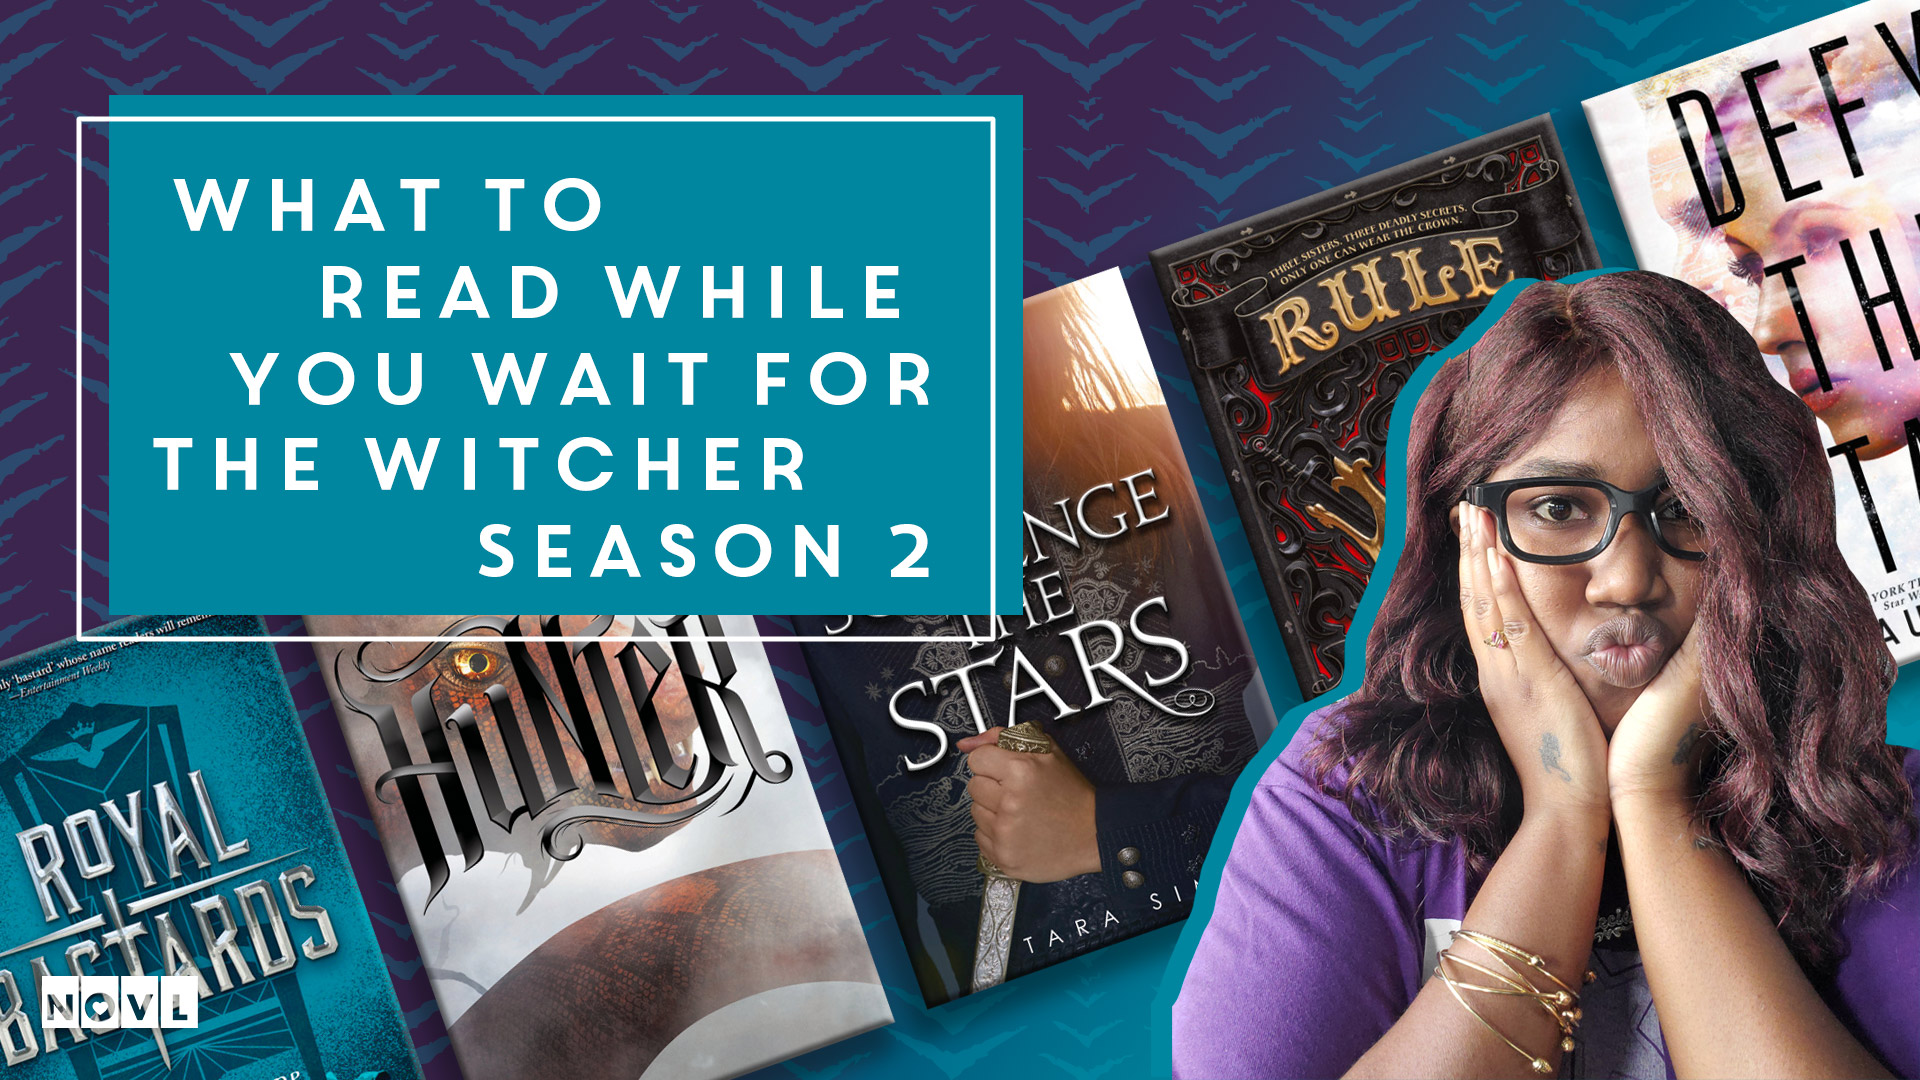 The NOVL Blog, Featured Image for Article: What to read while you wait for The Witcher Season 2